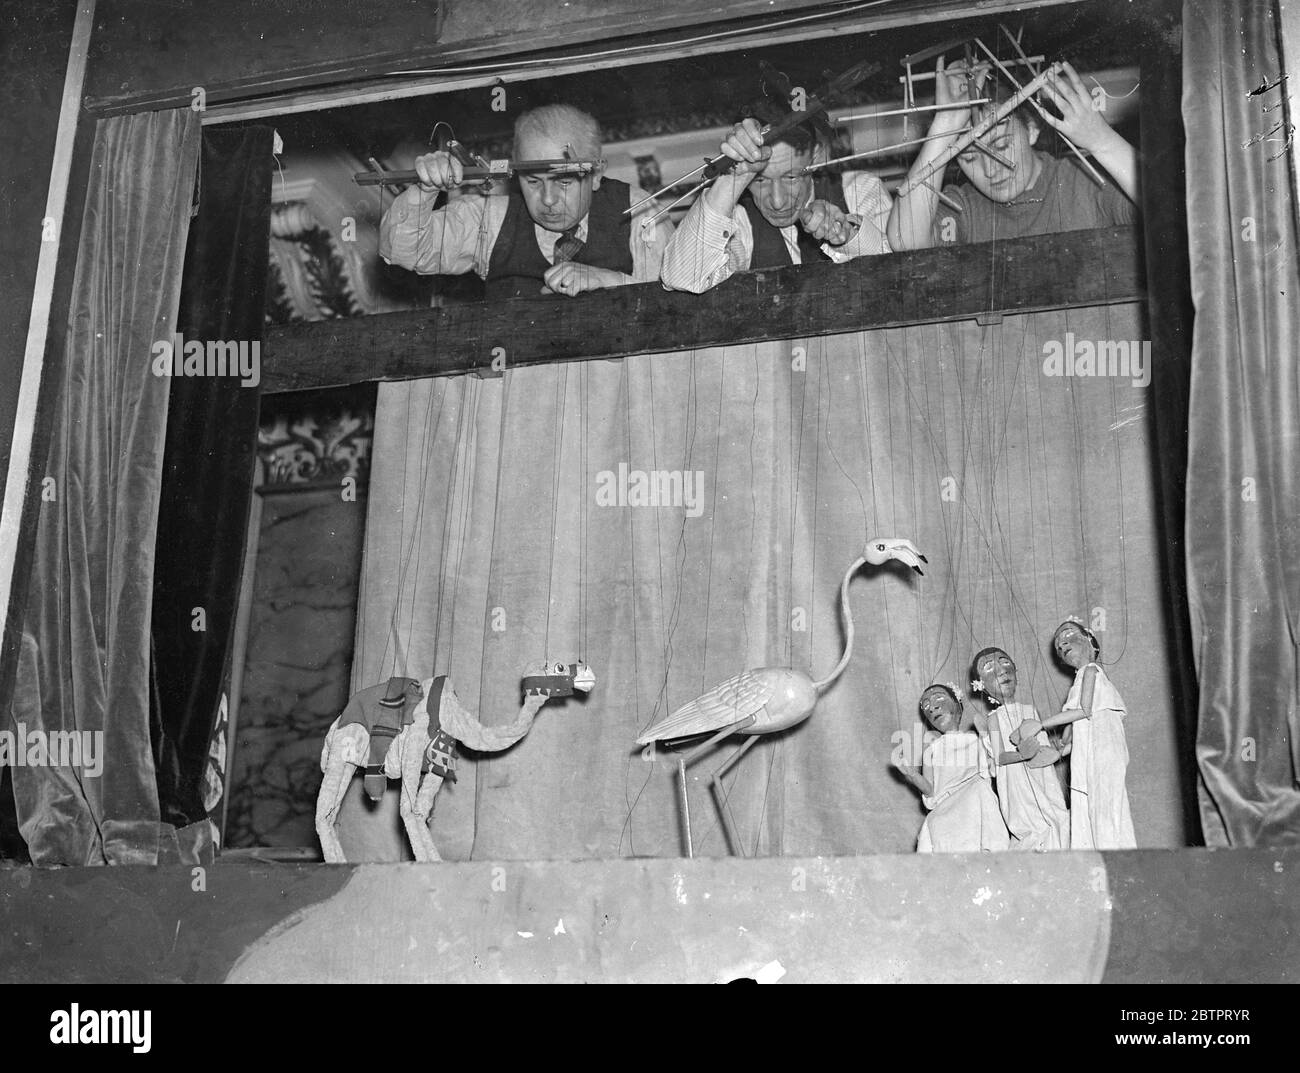 Pulling the strings!. Puppet show opens in London. The British Puppet and Model Theatre Guild's twelfth exhibition has opened at a Victory House, Leicester Square. The exhibition includes puppets, shadows, marionettes, scenic designs and model stages. Photo shows, exhibitors manipulating their puppet on a model stage. 25 October 1937 Stock Photo